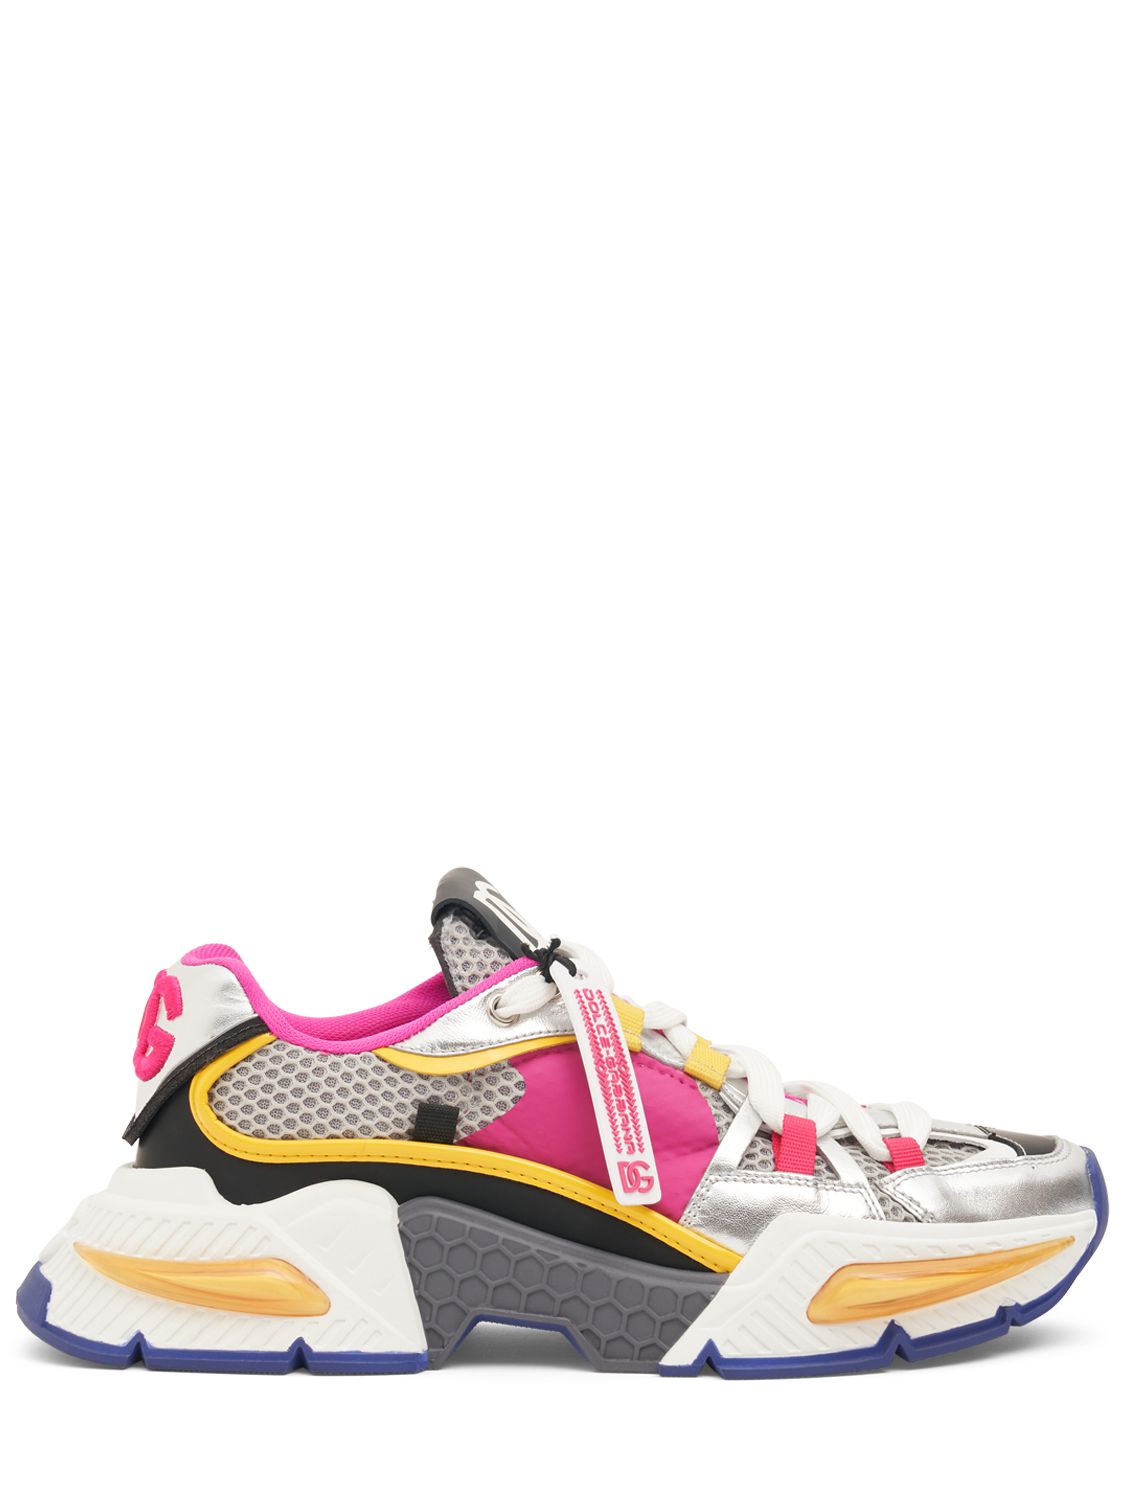 Dolce & Gabbana Air Master Mesh & Leather Sneakers In Fuchsia,yellow